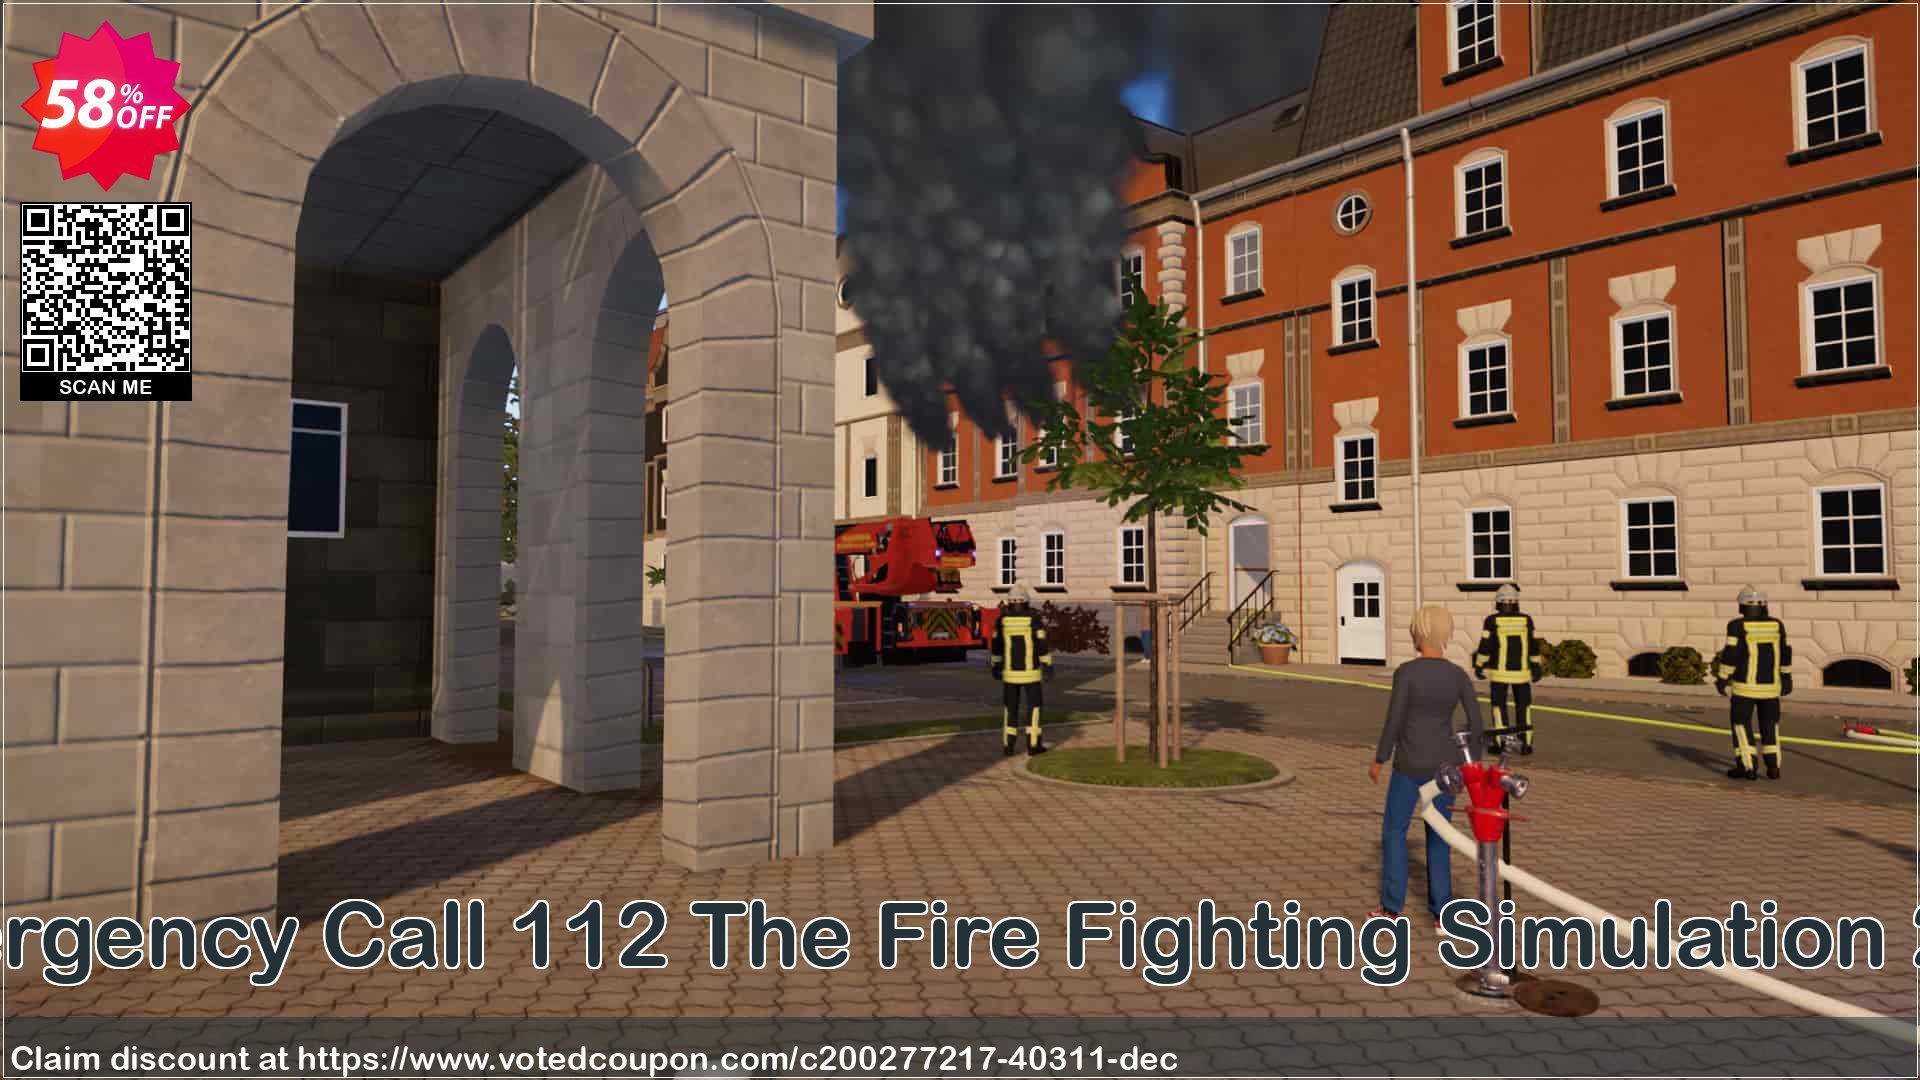 Emergency Call 112 The Fire Fighting Simulation 2 PC Coupon Code May 2024, 58% OFF - VotedCoupon